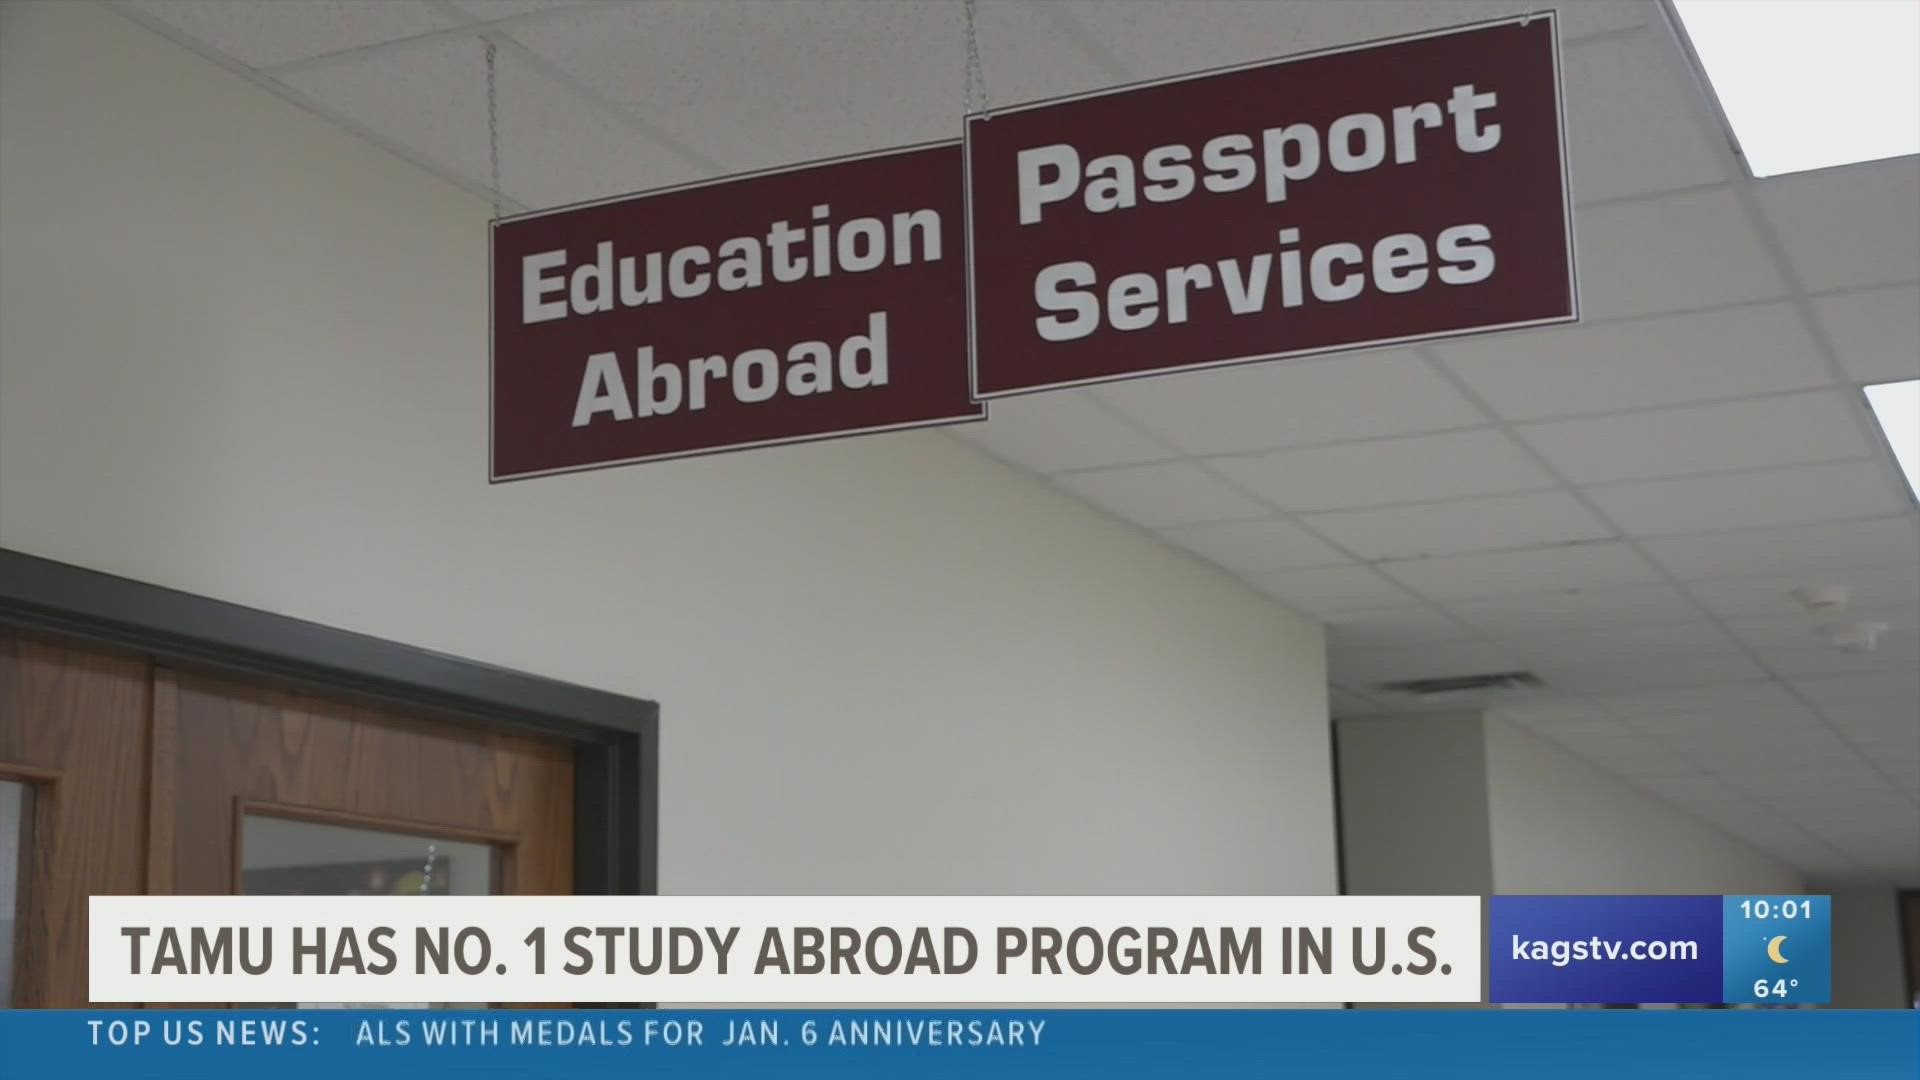 After battling NYU for the top spot for many years, Texas A&M has claimed the title of the top study abroad program in the U.S.